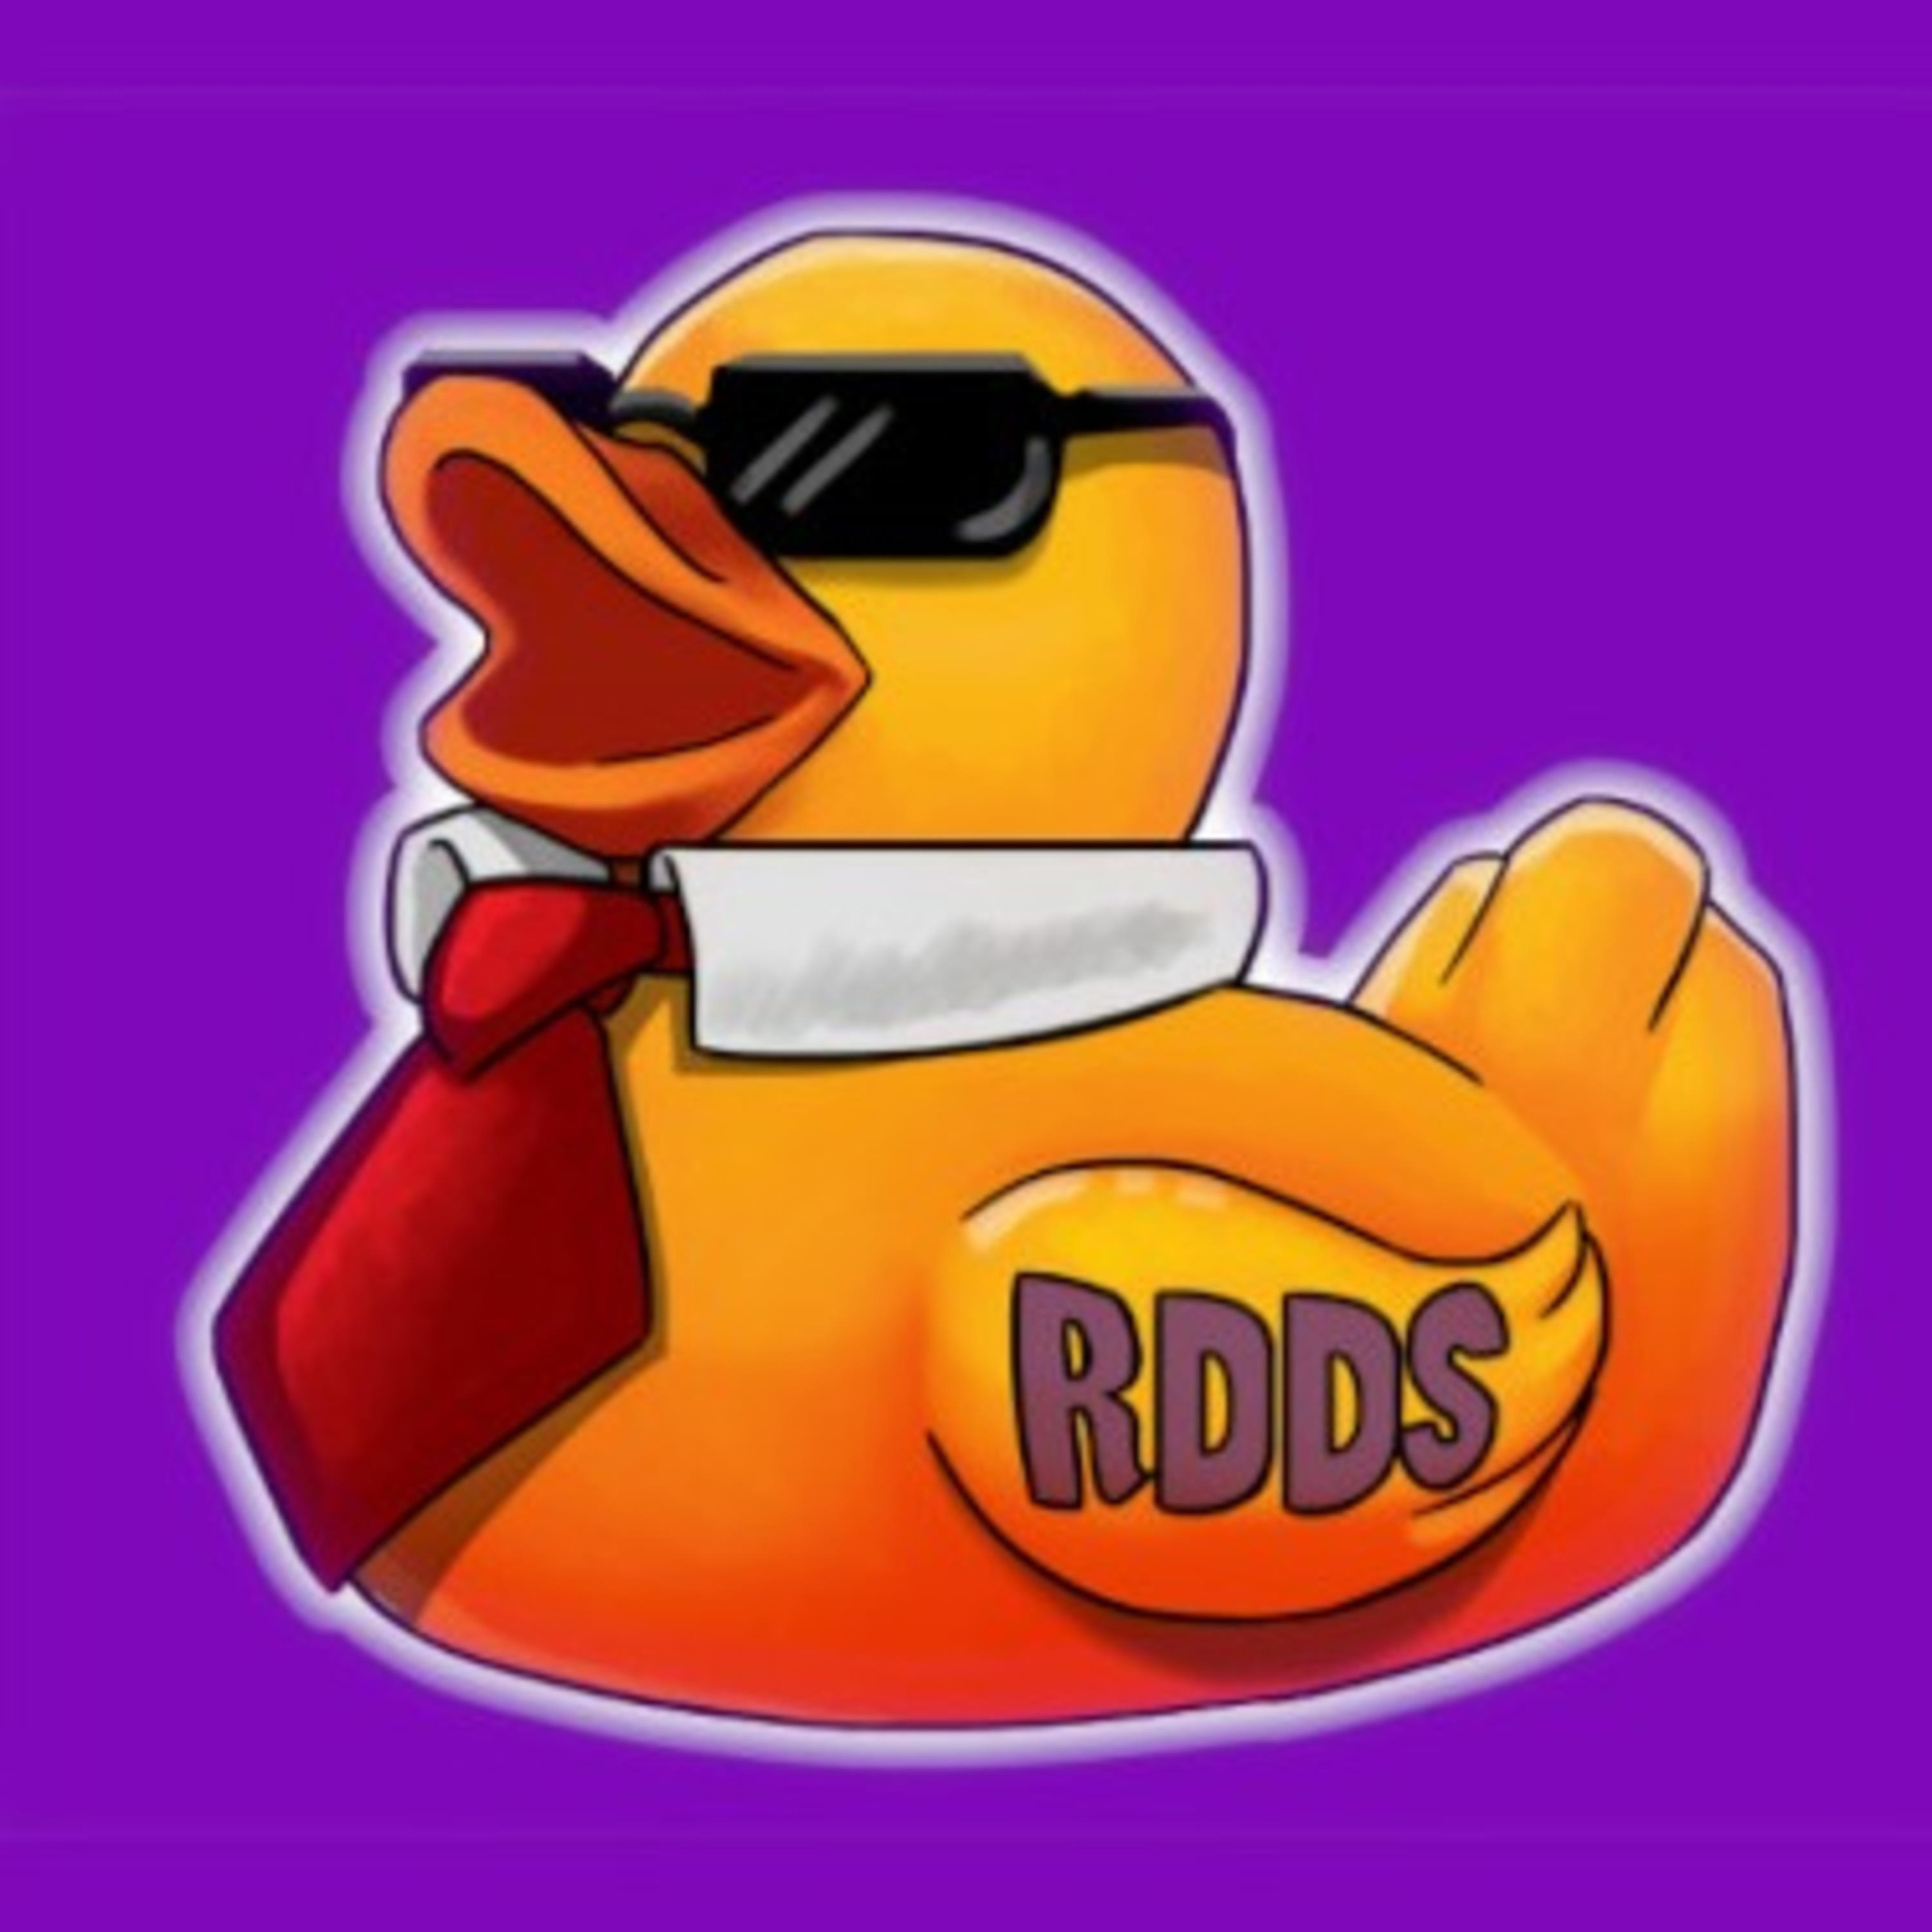 A Beginner's Journey with @CodeWithJulie | Rubber Duck Dev Show 60